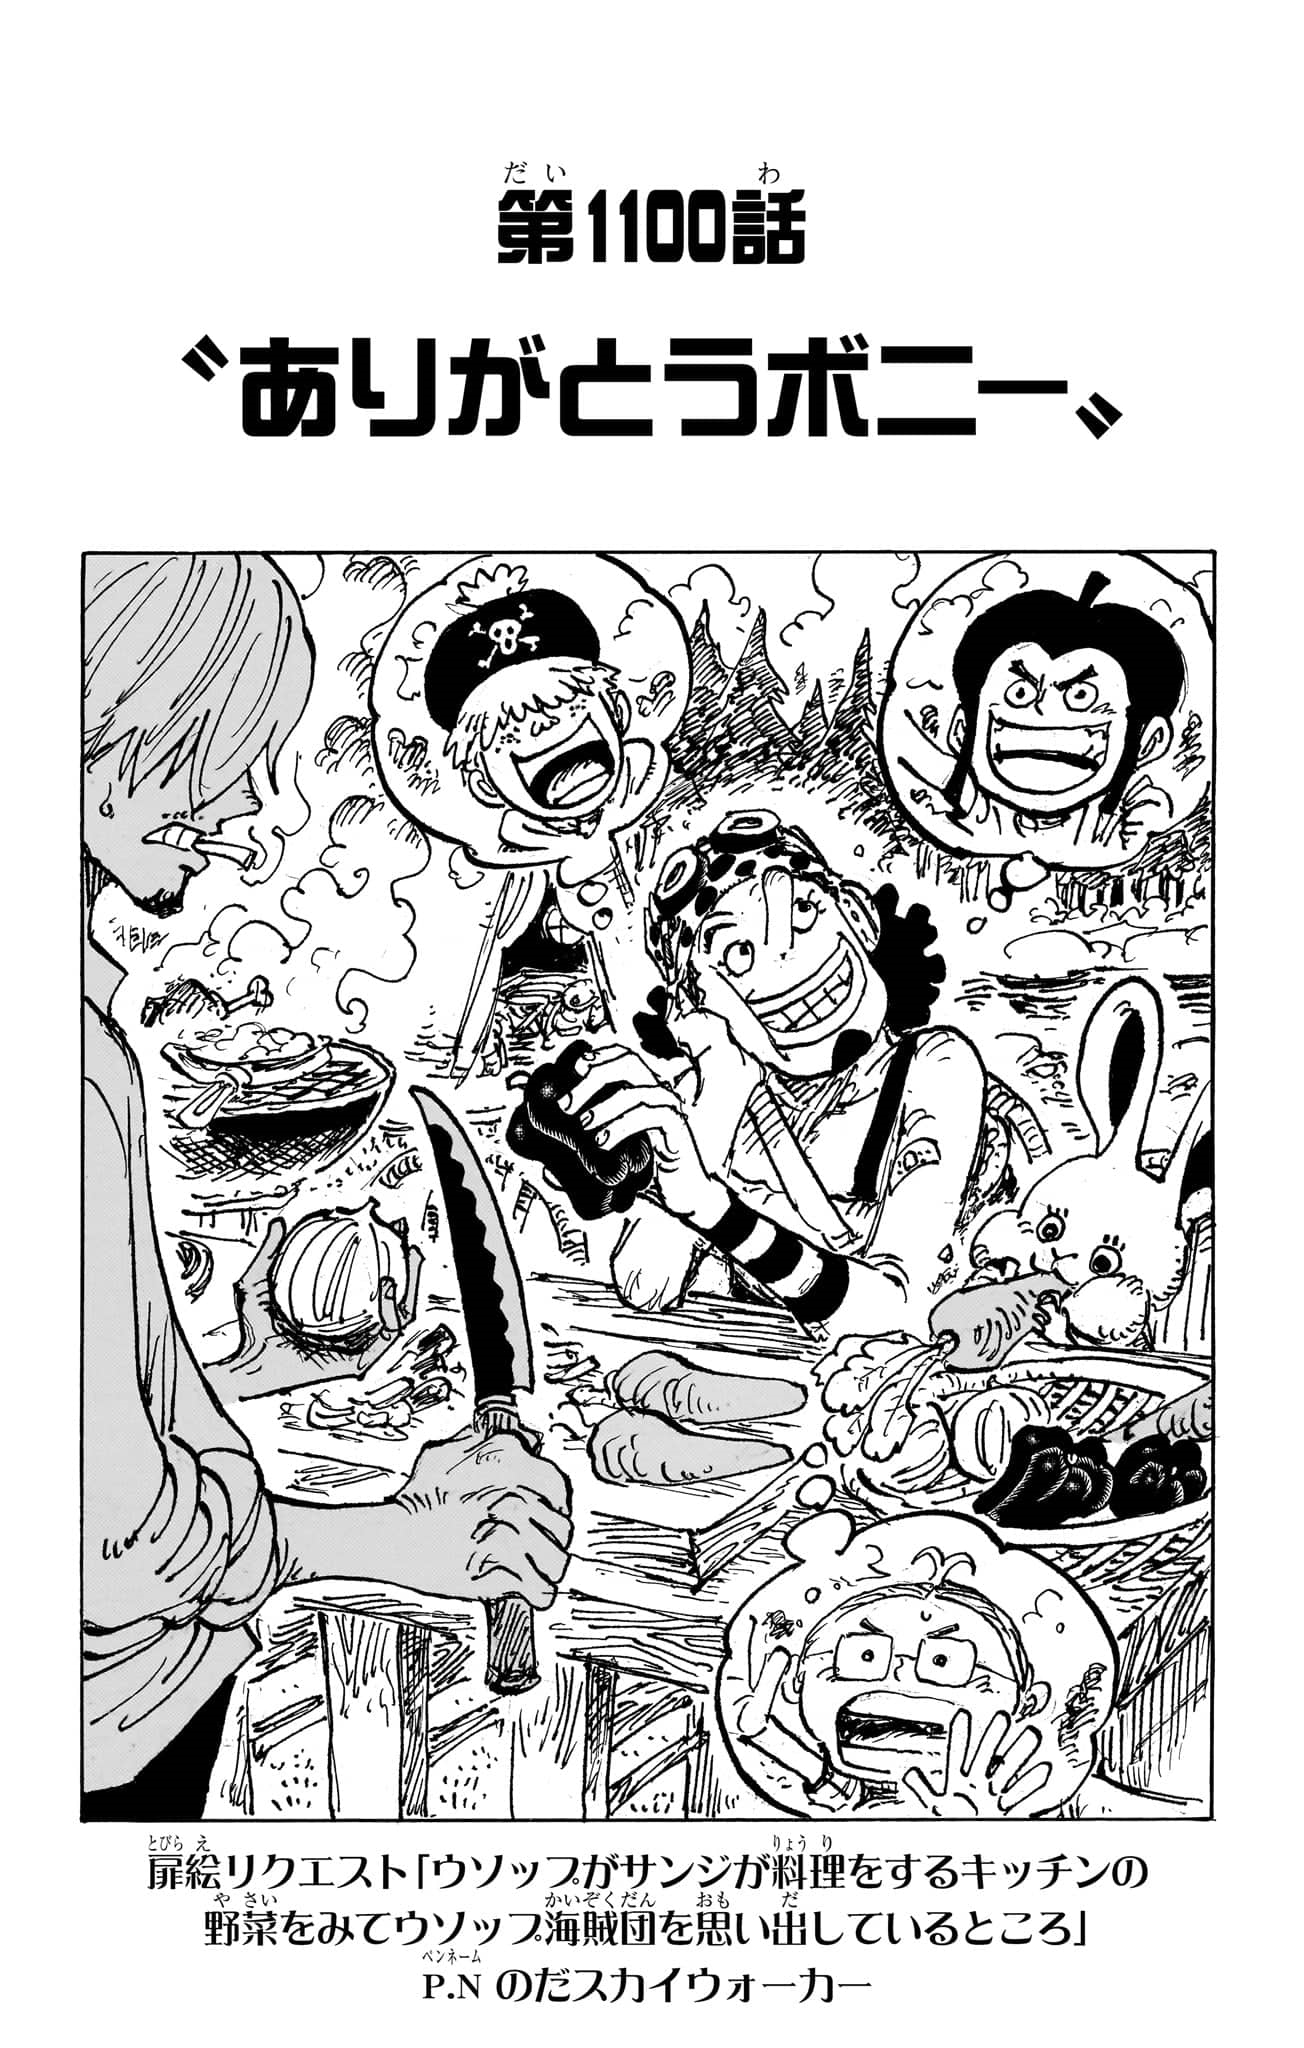 Chapter 1096 Spoilers] Identifying pirate, marine and RA